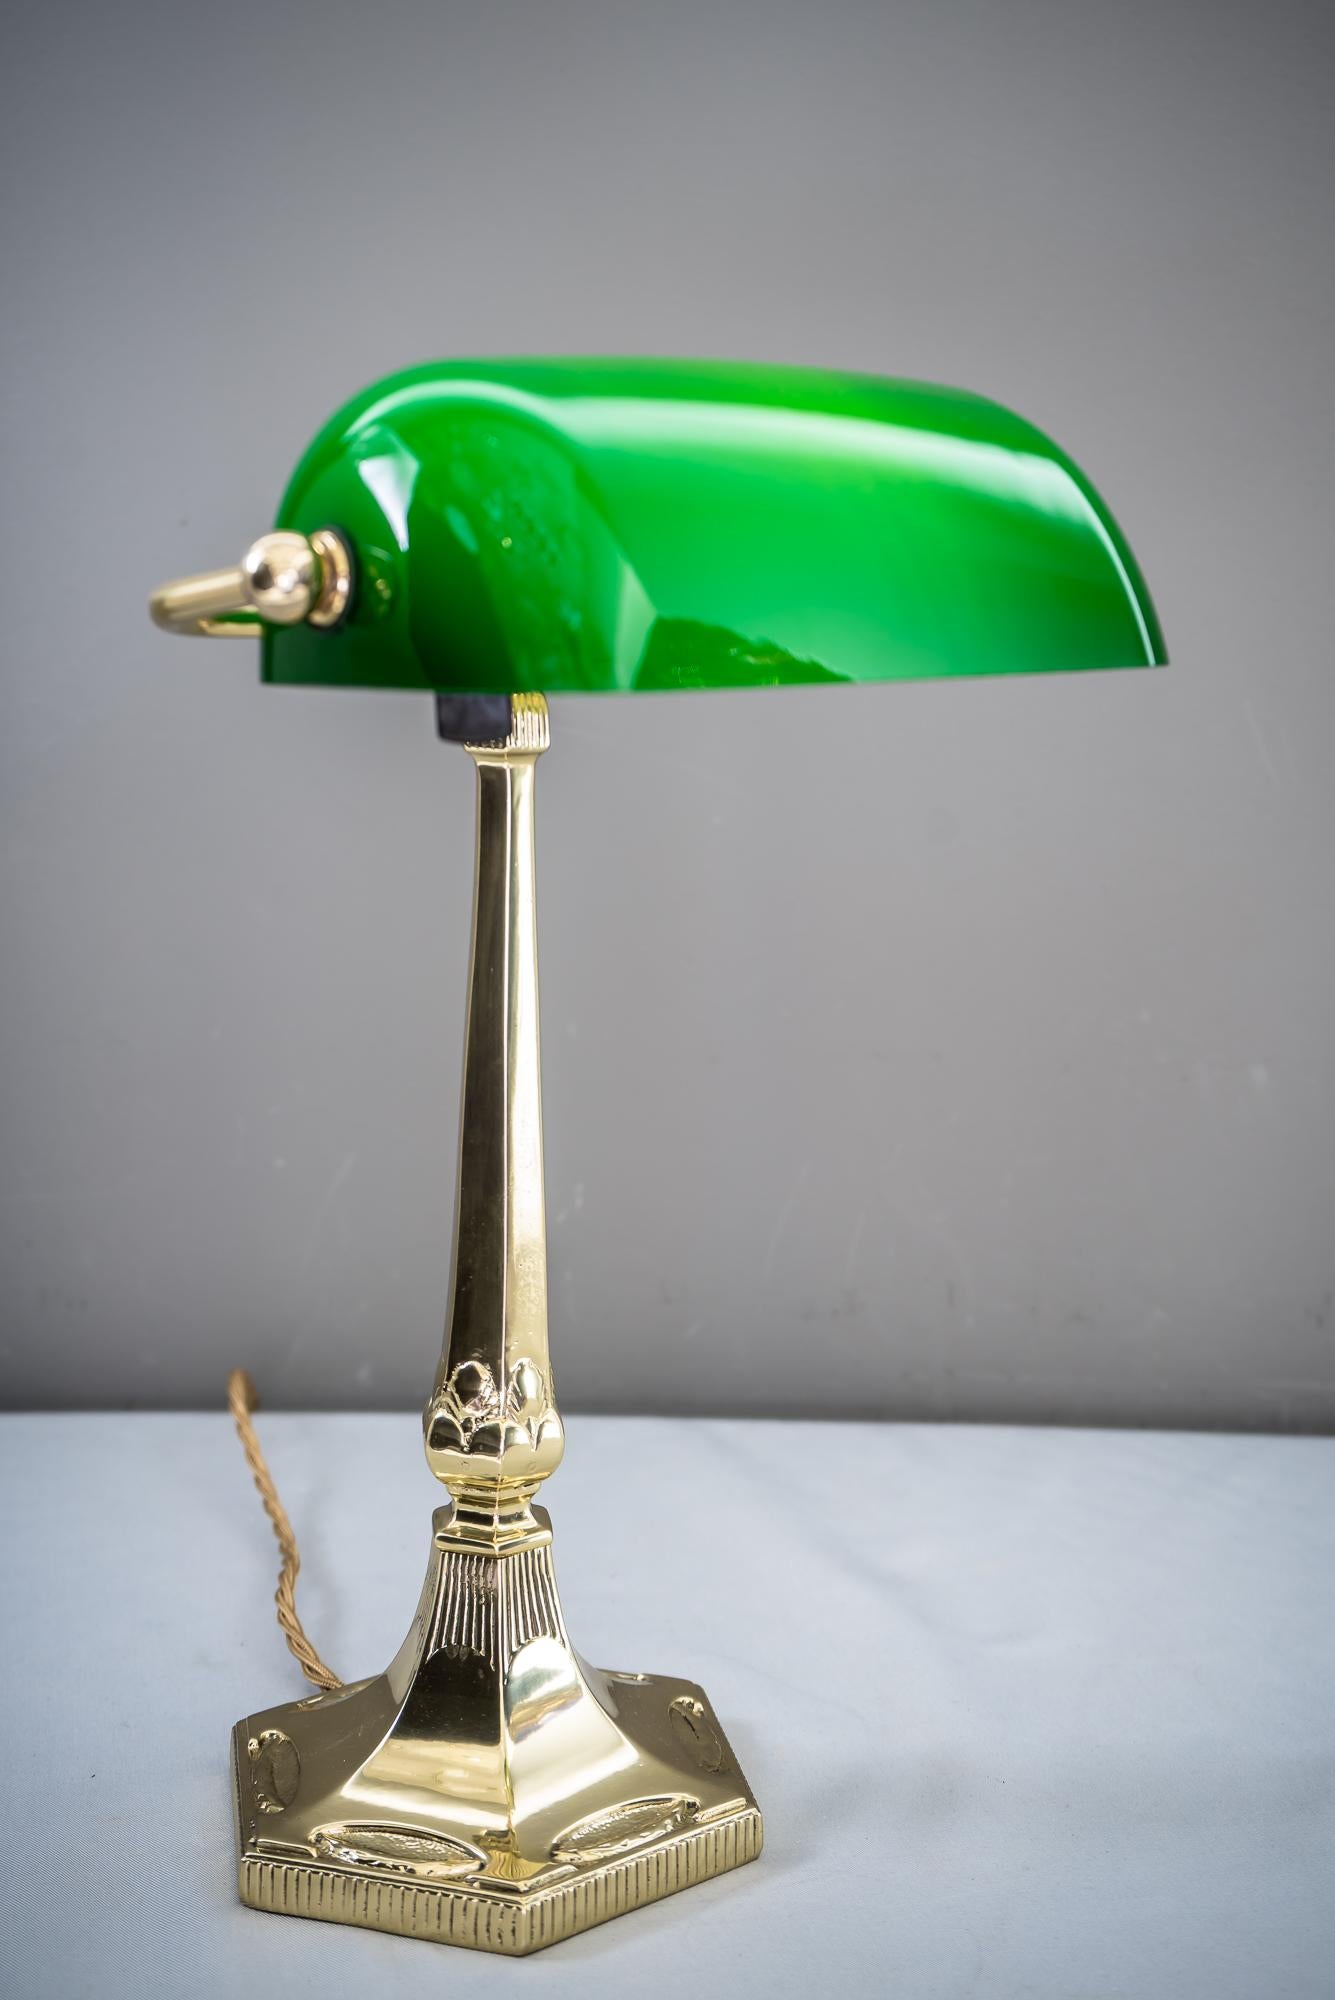 Table lamp with green glass in the style of Jugendstil
Polished and stove enameled
This lamp is completely new. (Not antique).